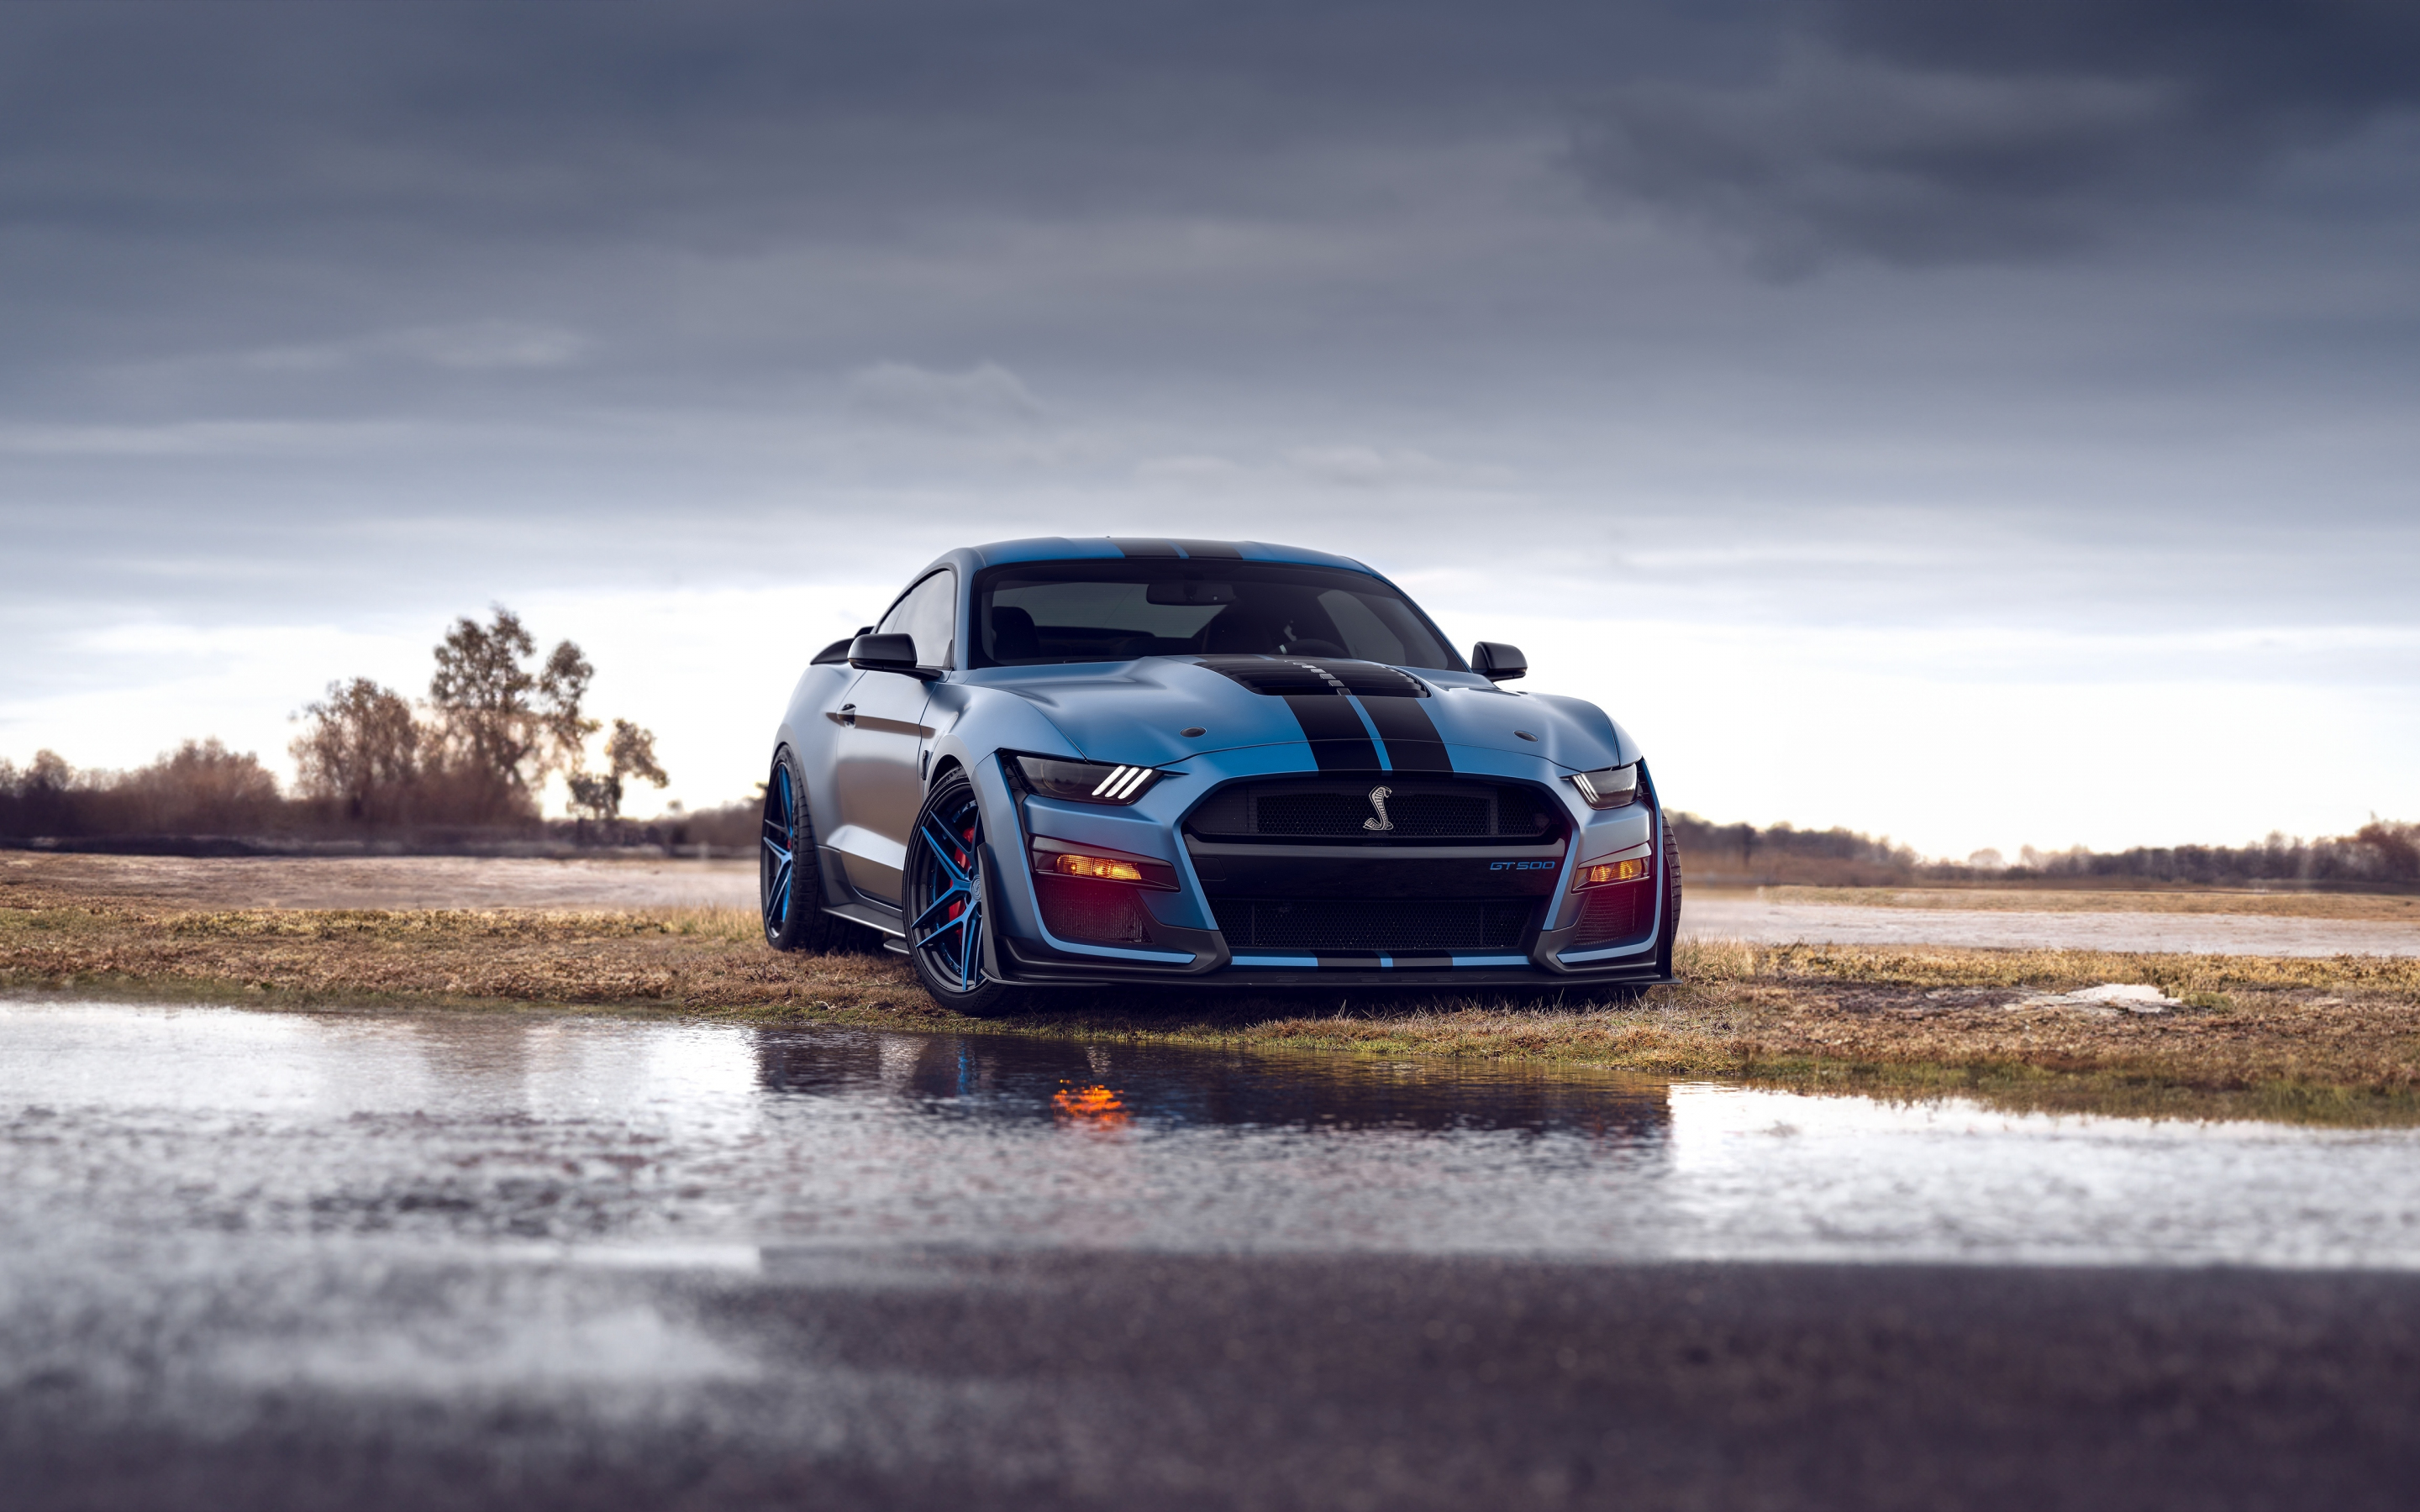 Blue Ford Mustang Shelby Gt500, 2023 car, 2880x1800 wallpaper